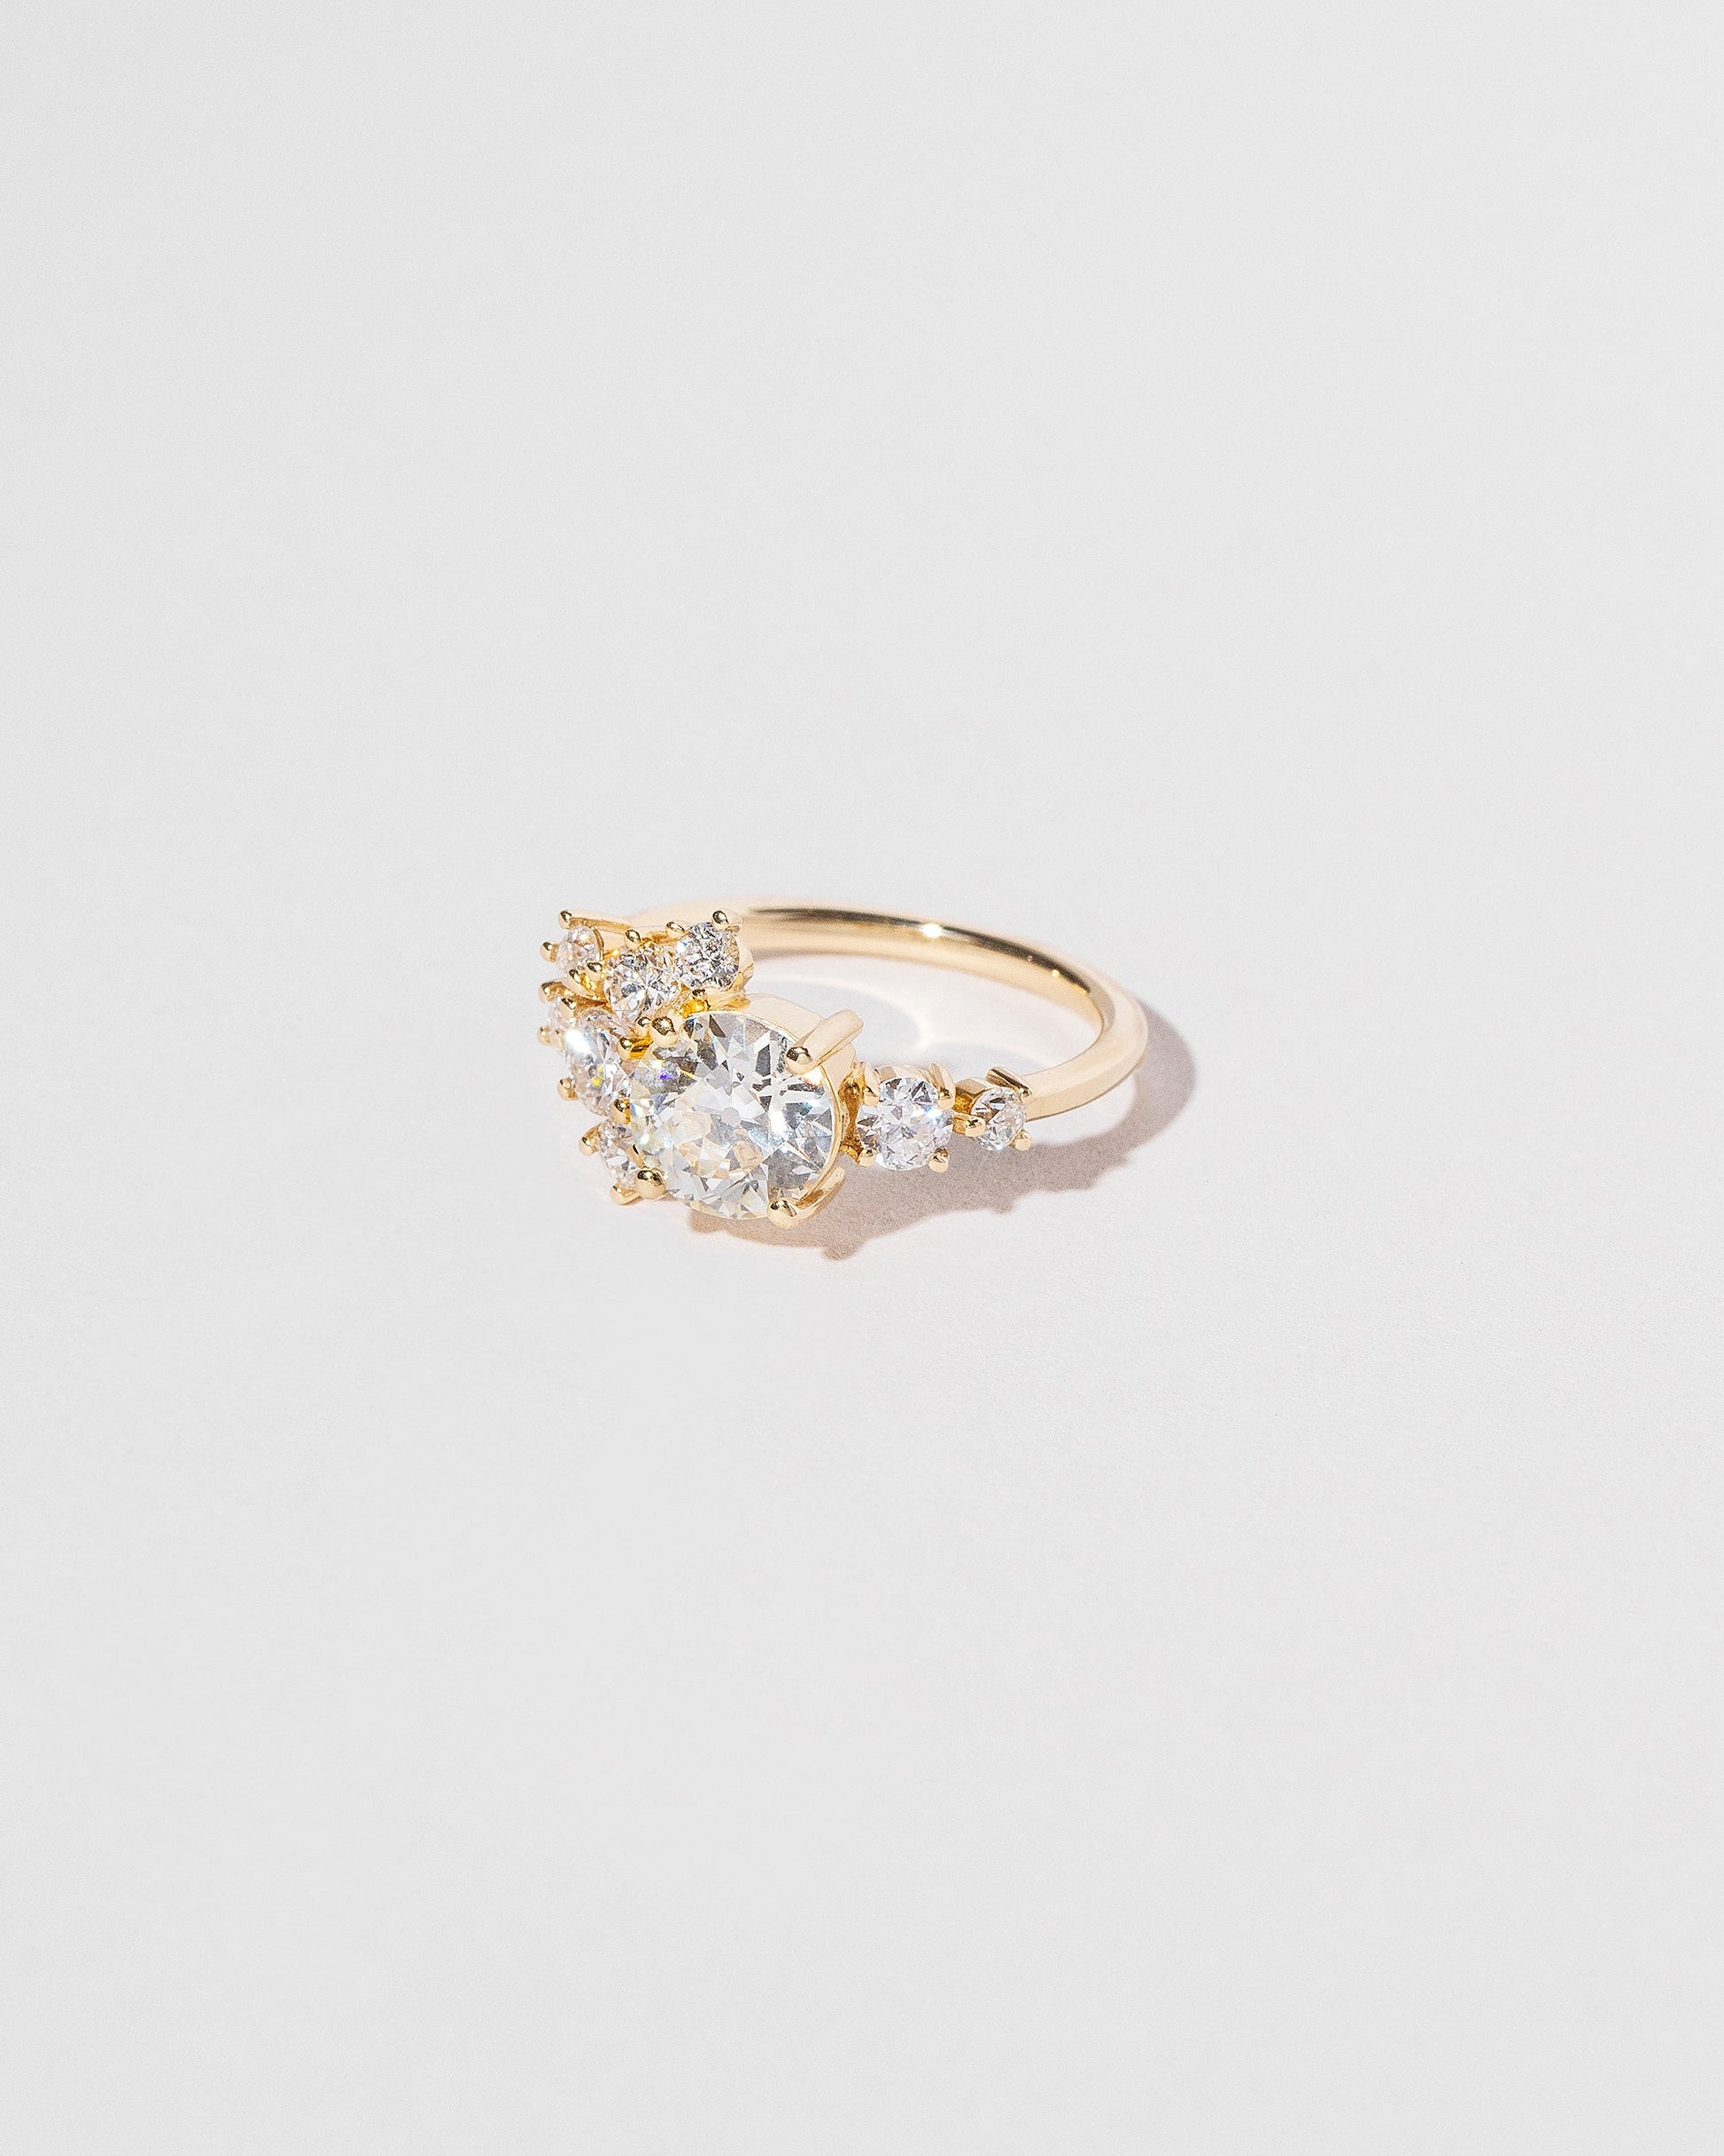 Cluster style ring with white diamonds set in 18k yellow gold, right side close up on light color background.